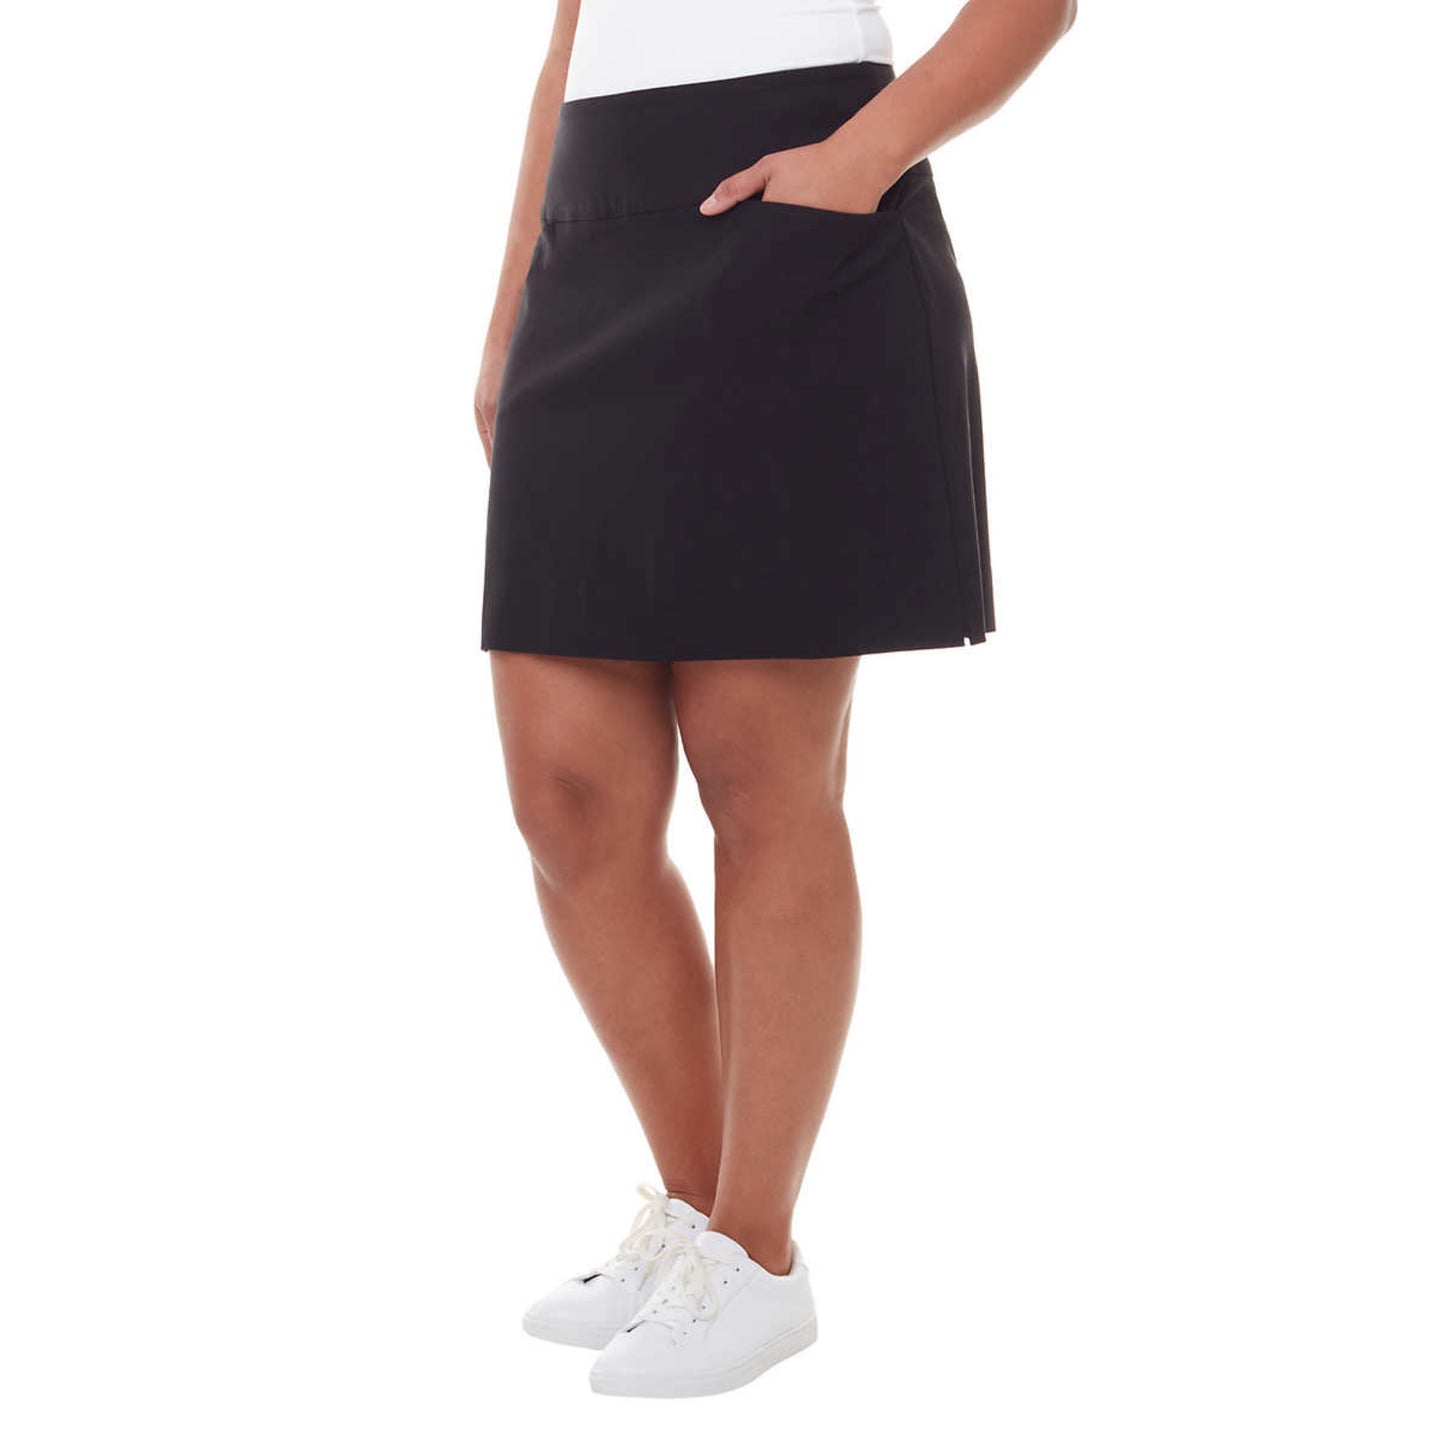 S.C. & CO Women's Tummy Control Built-in Shorts Pockets Stretch Active Casual Skort